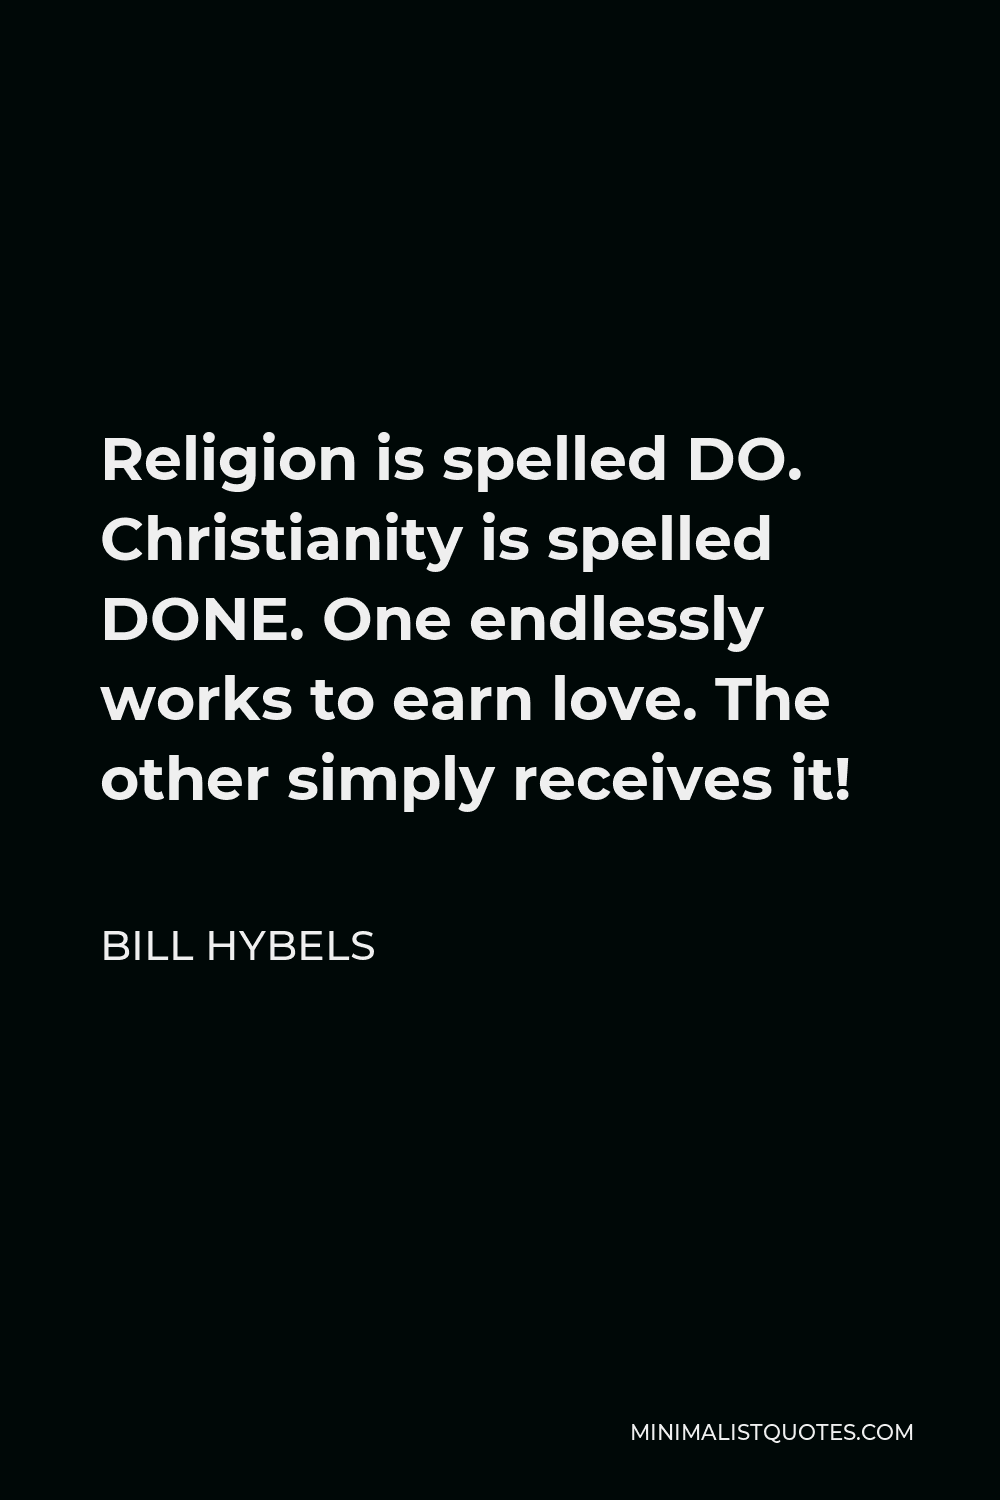 Bill Hybels Quote - Religion is spelled DO. Christianity is spelled DONE. One endlessly works to earn love. The other simply receives it!